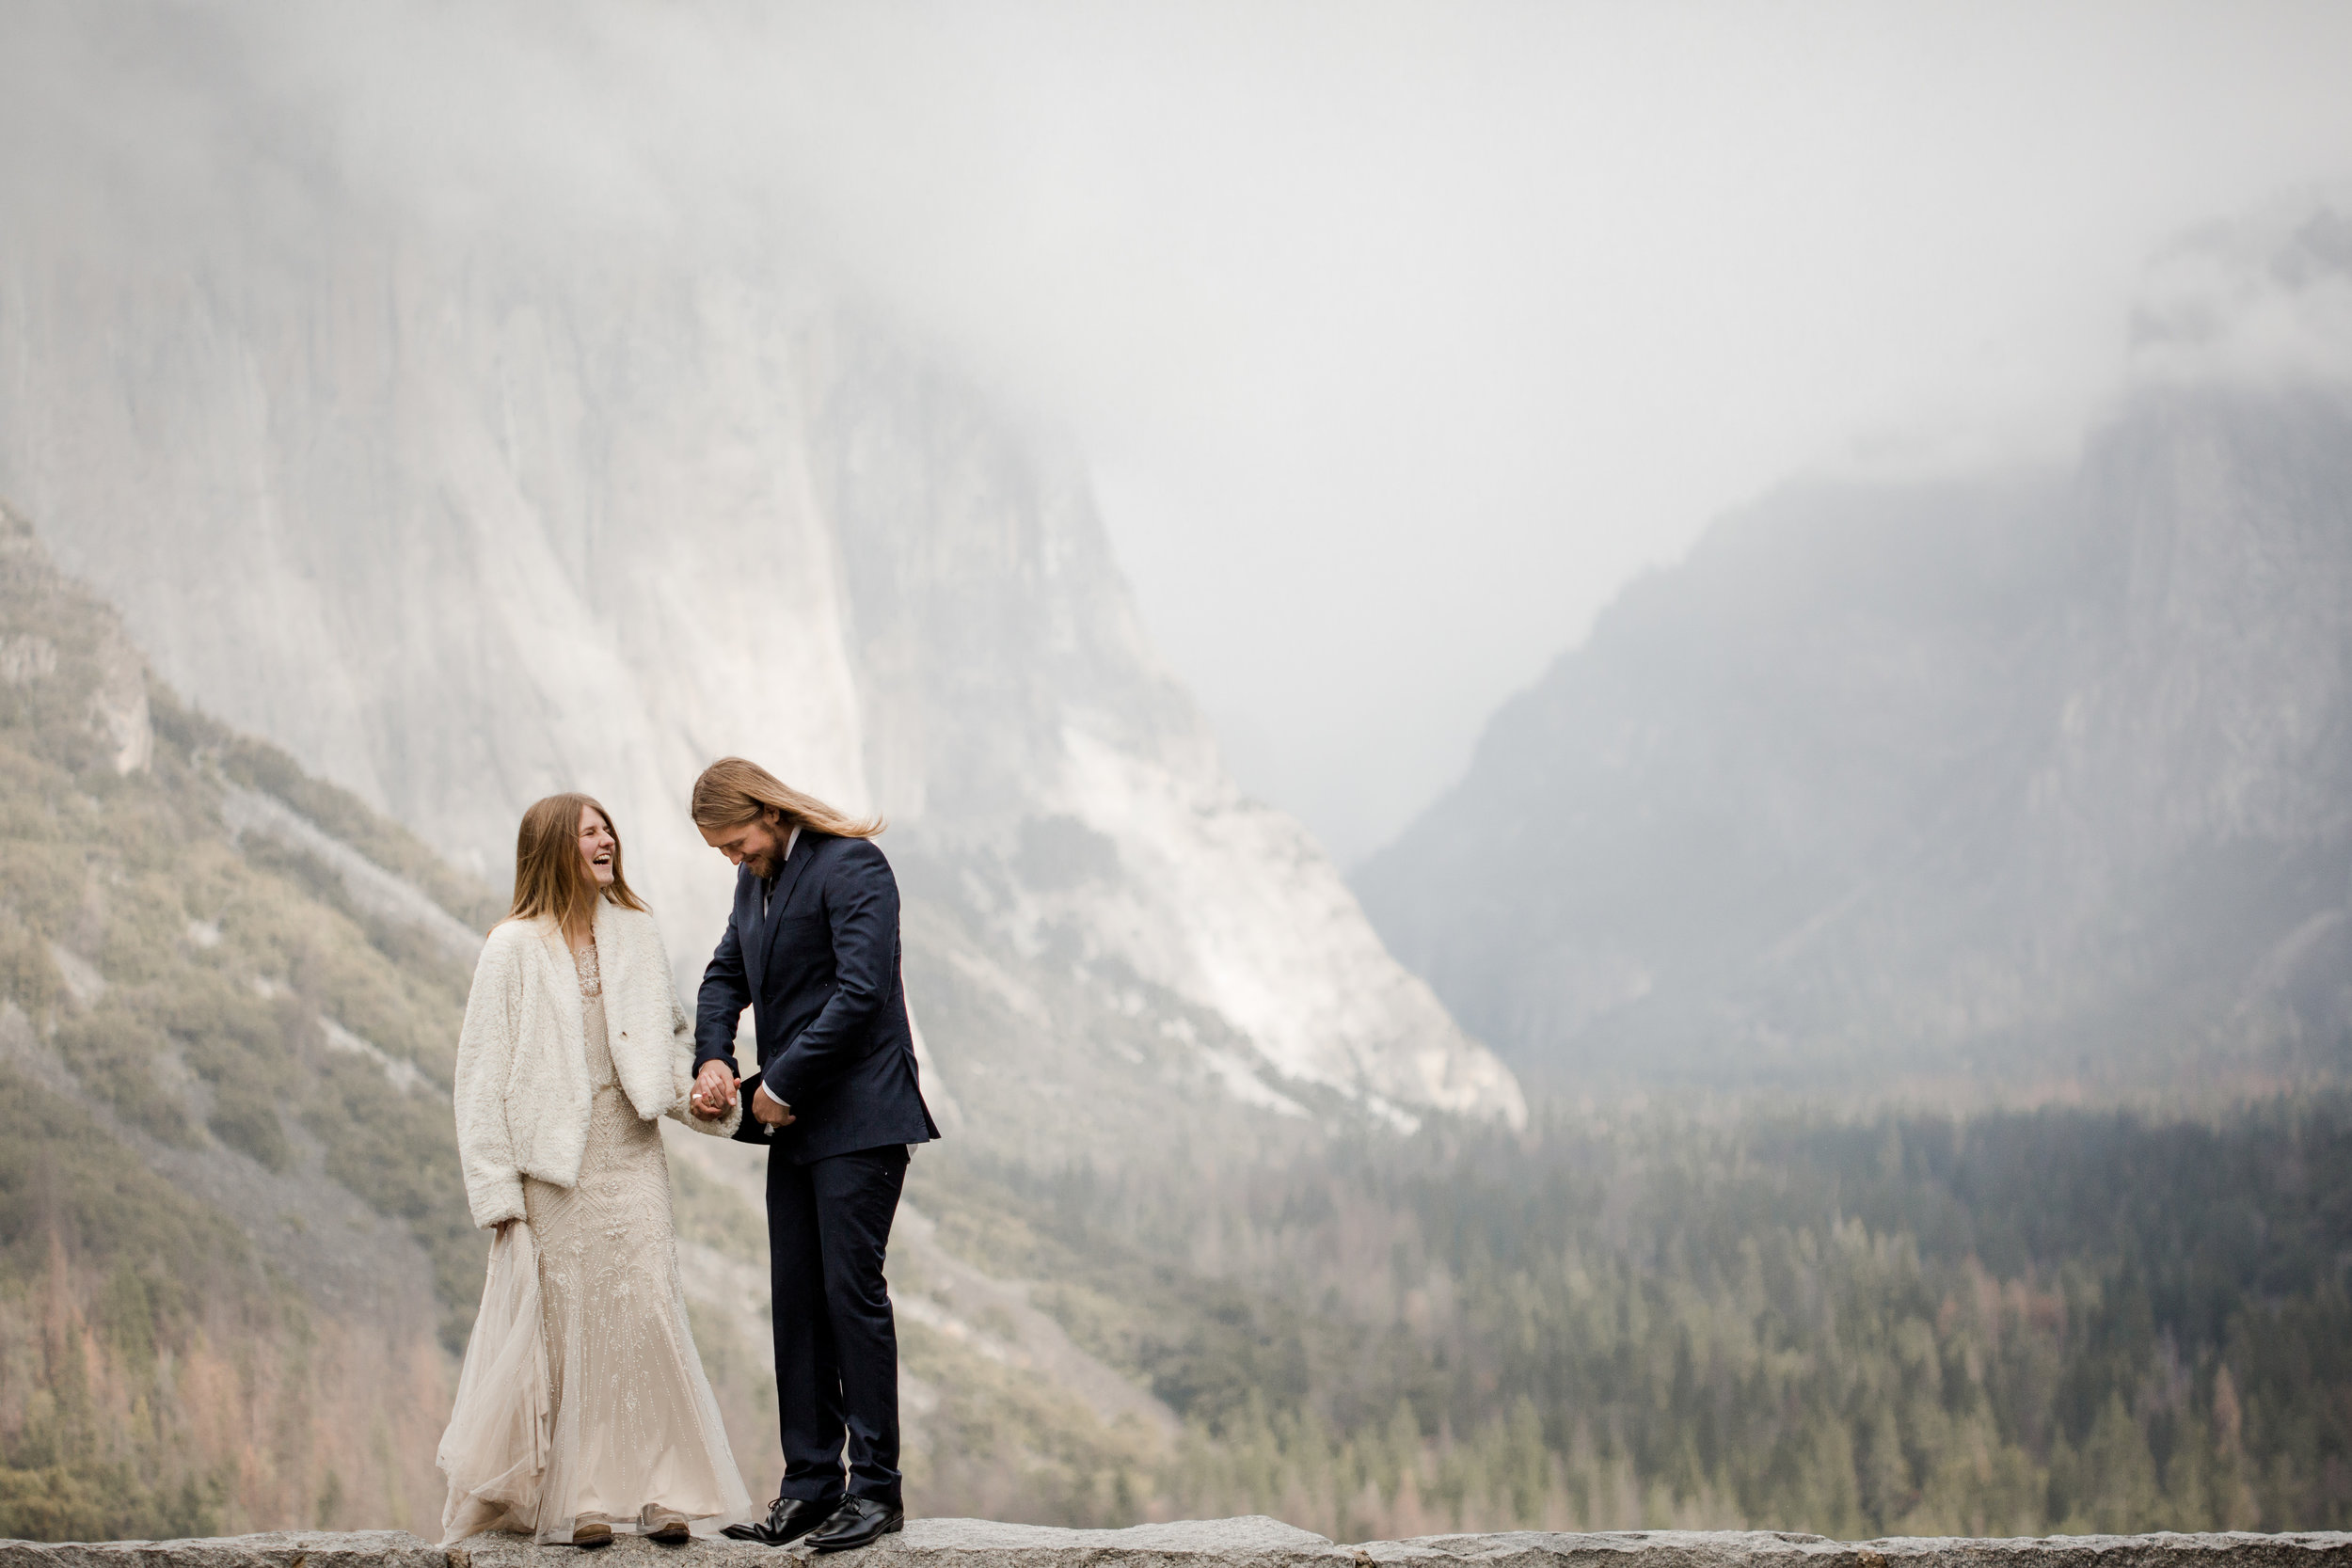 nicole-daacke-photography-yousemite-national-park-elopement-photographer-winter-cloud-moody-elope-inspiration-yosemite-valley-tunnel-view-winter-cloud-fog-weather-wedding-photos-3.jpg